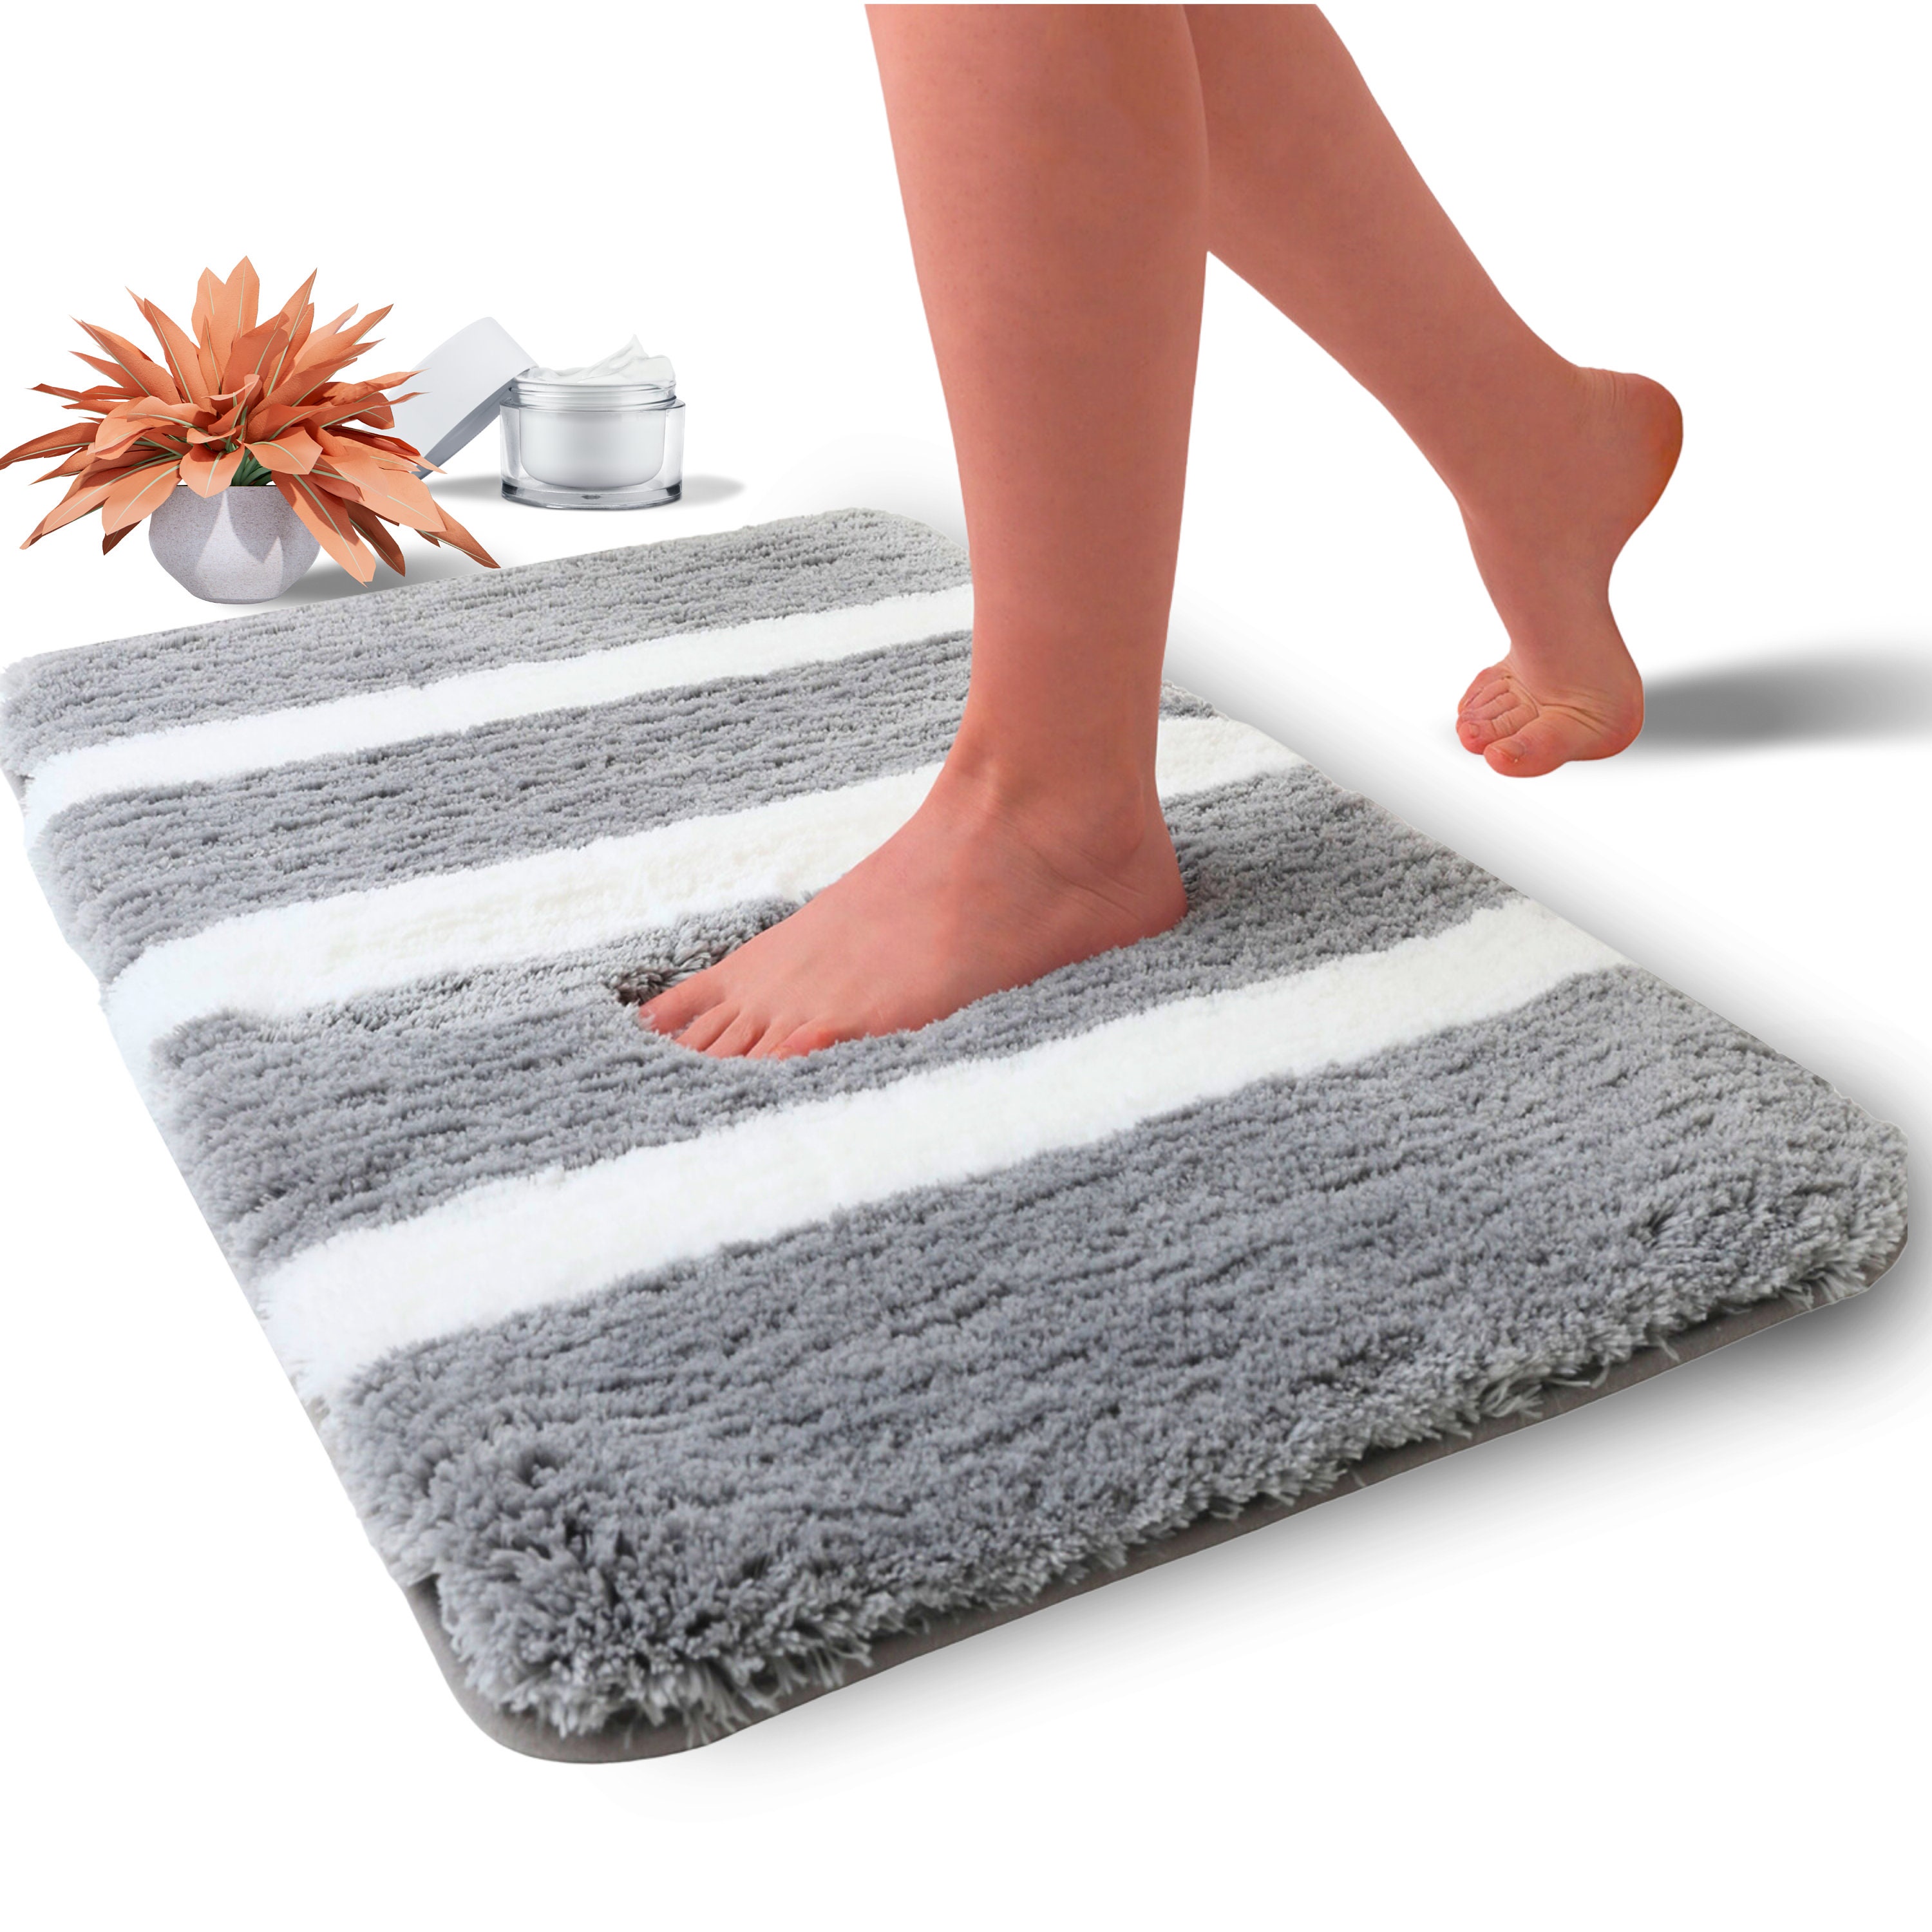 TOKLYUIE Super Absorbent Floor Mat, Quick-drying Bathroom Mats, Absorbent Bath Mats for Home, Rubber Non-Slip Bottoms, Easy to Clean, Simple